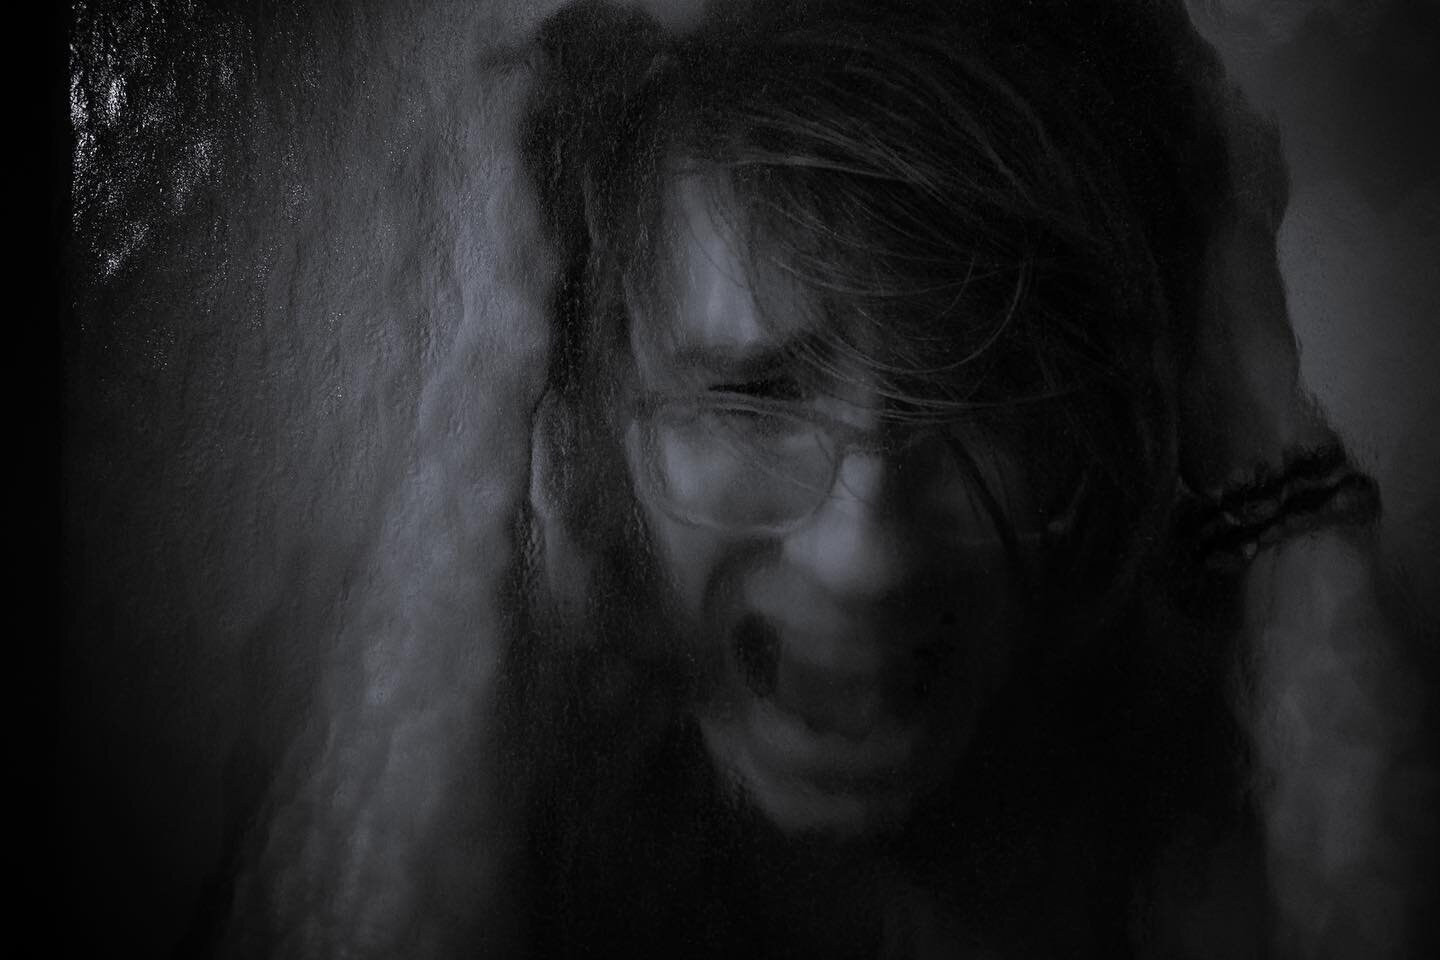 Happy Halloween! Hopefully you aren&rsquo;t also trapped in an underwater torture chamber with seemingly no way out.

#halloween2020 #torture #horrorart #dark_portraits #bnw_shot #sendhelp #lancasterpa